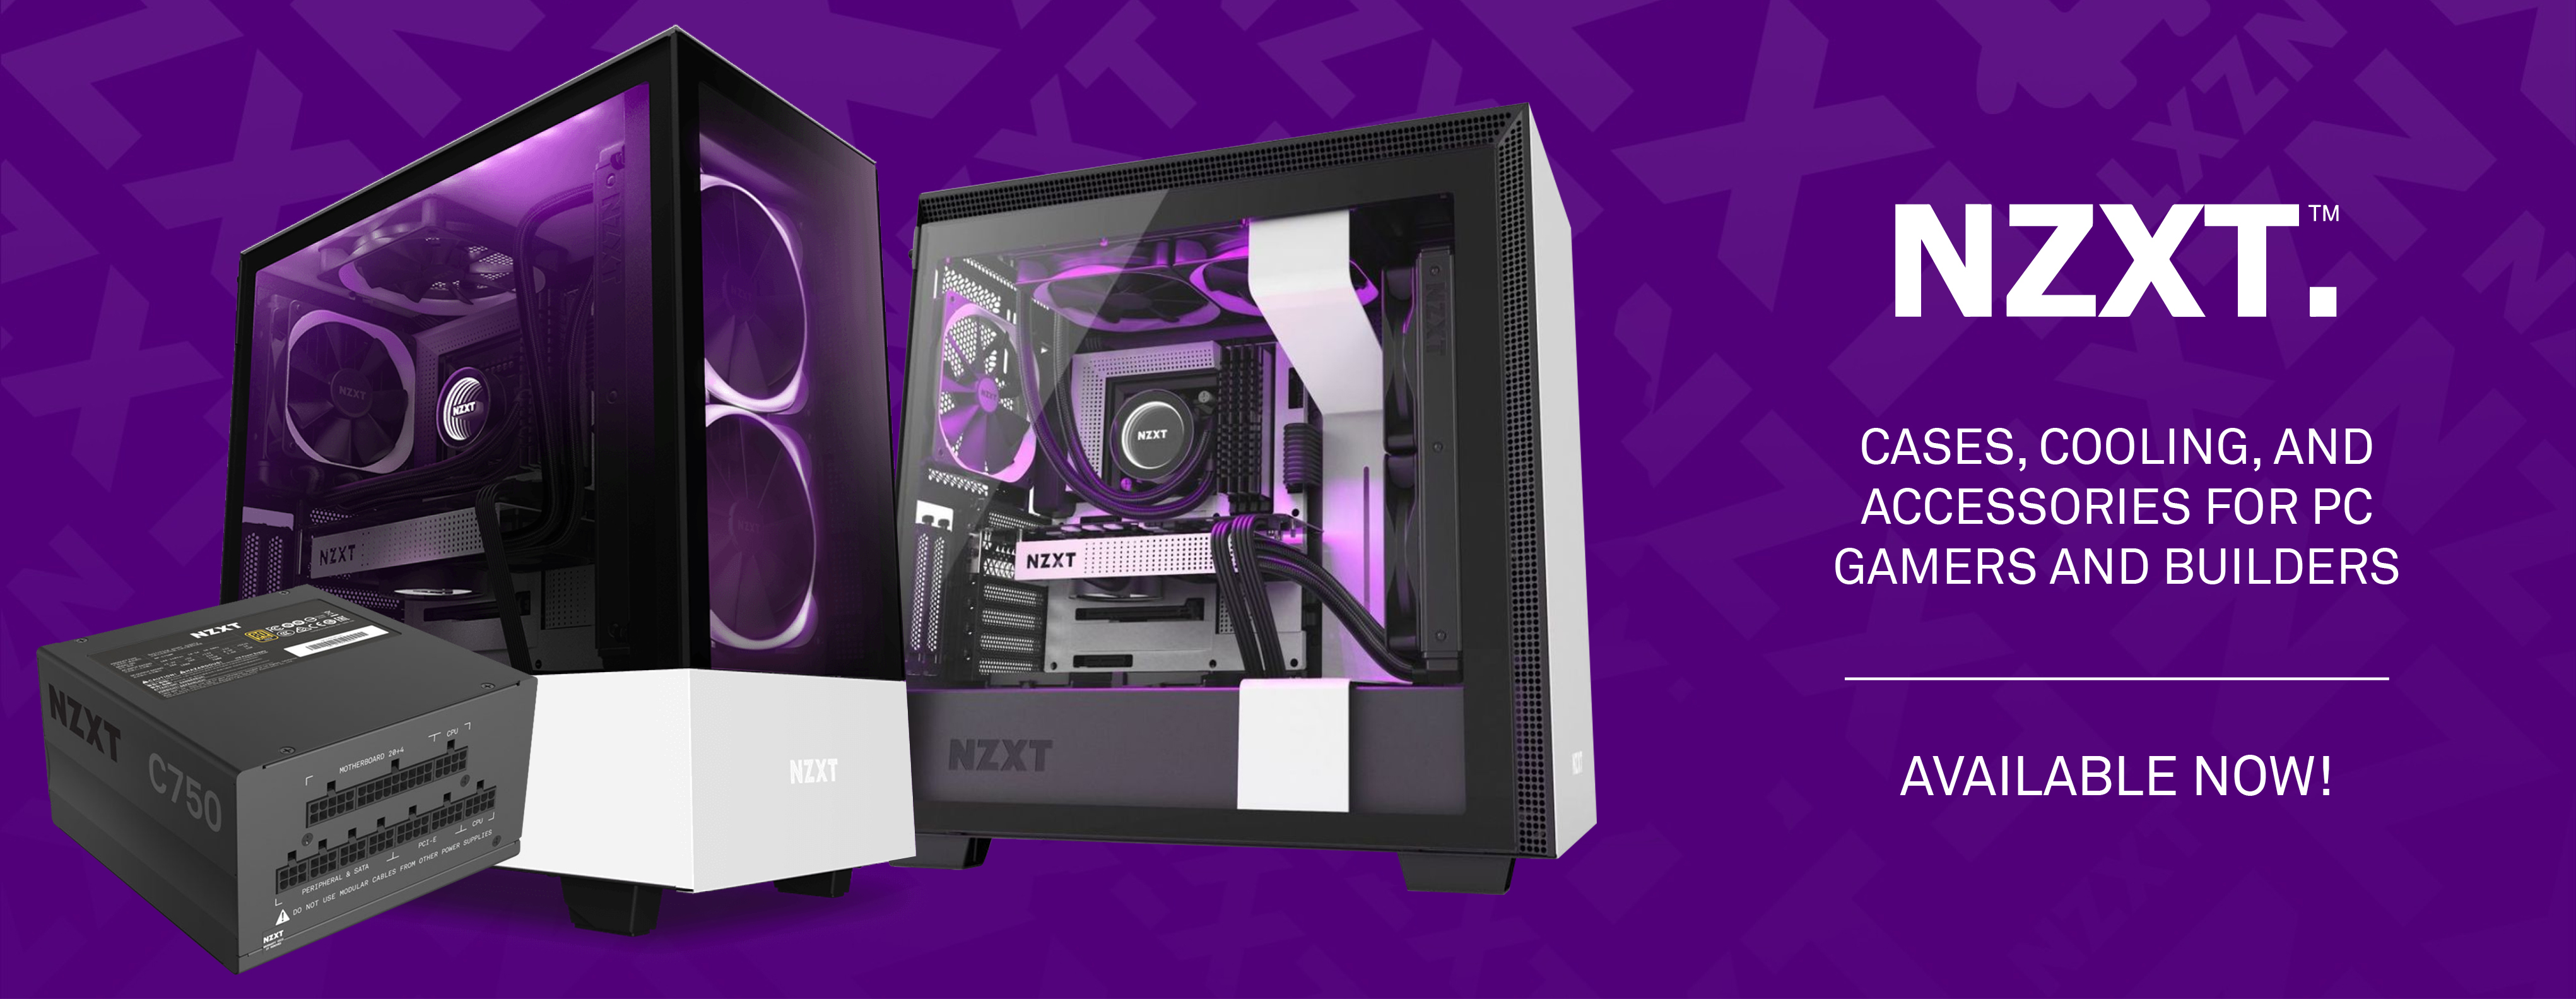 NZXT South Africa